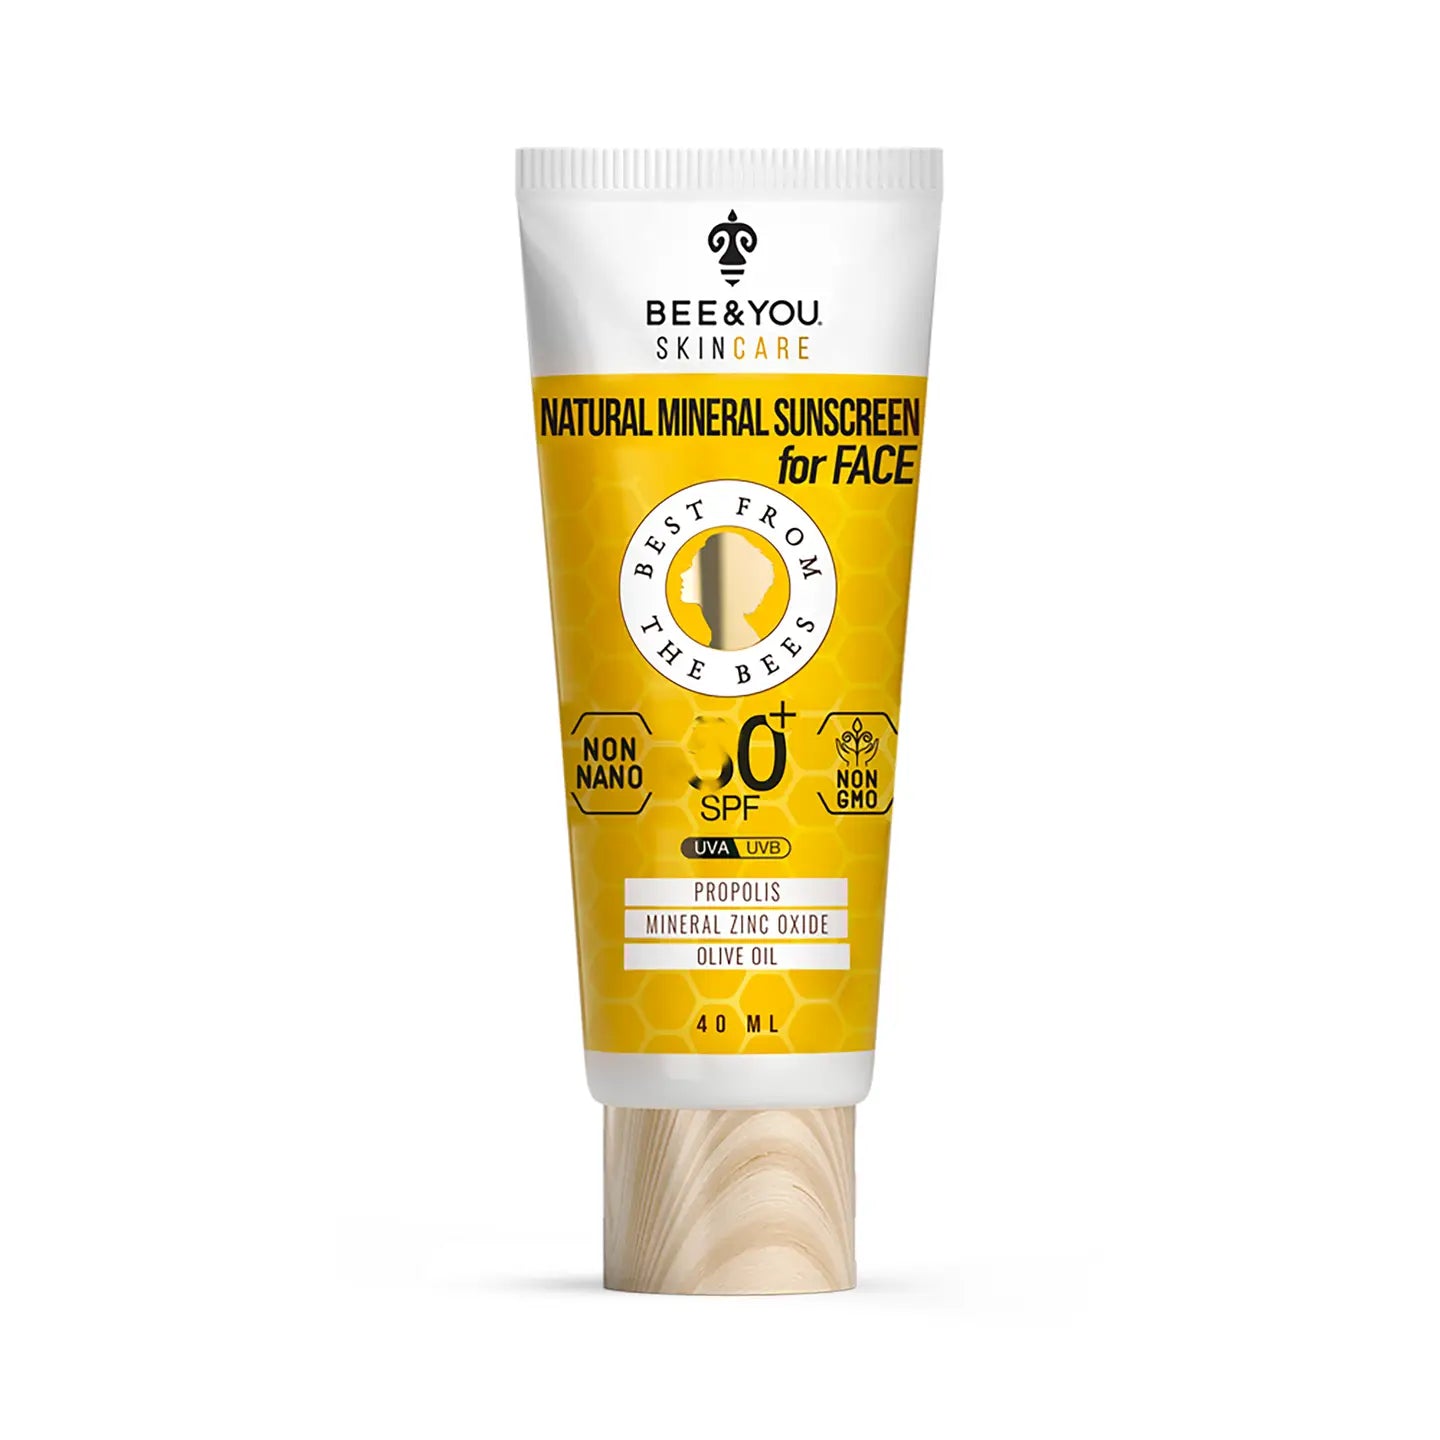 Natural Mineral Sunscreen for Face - SPF 30, Coral Reef Safe